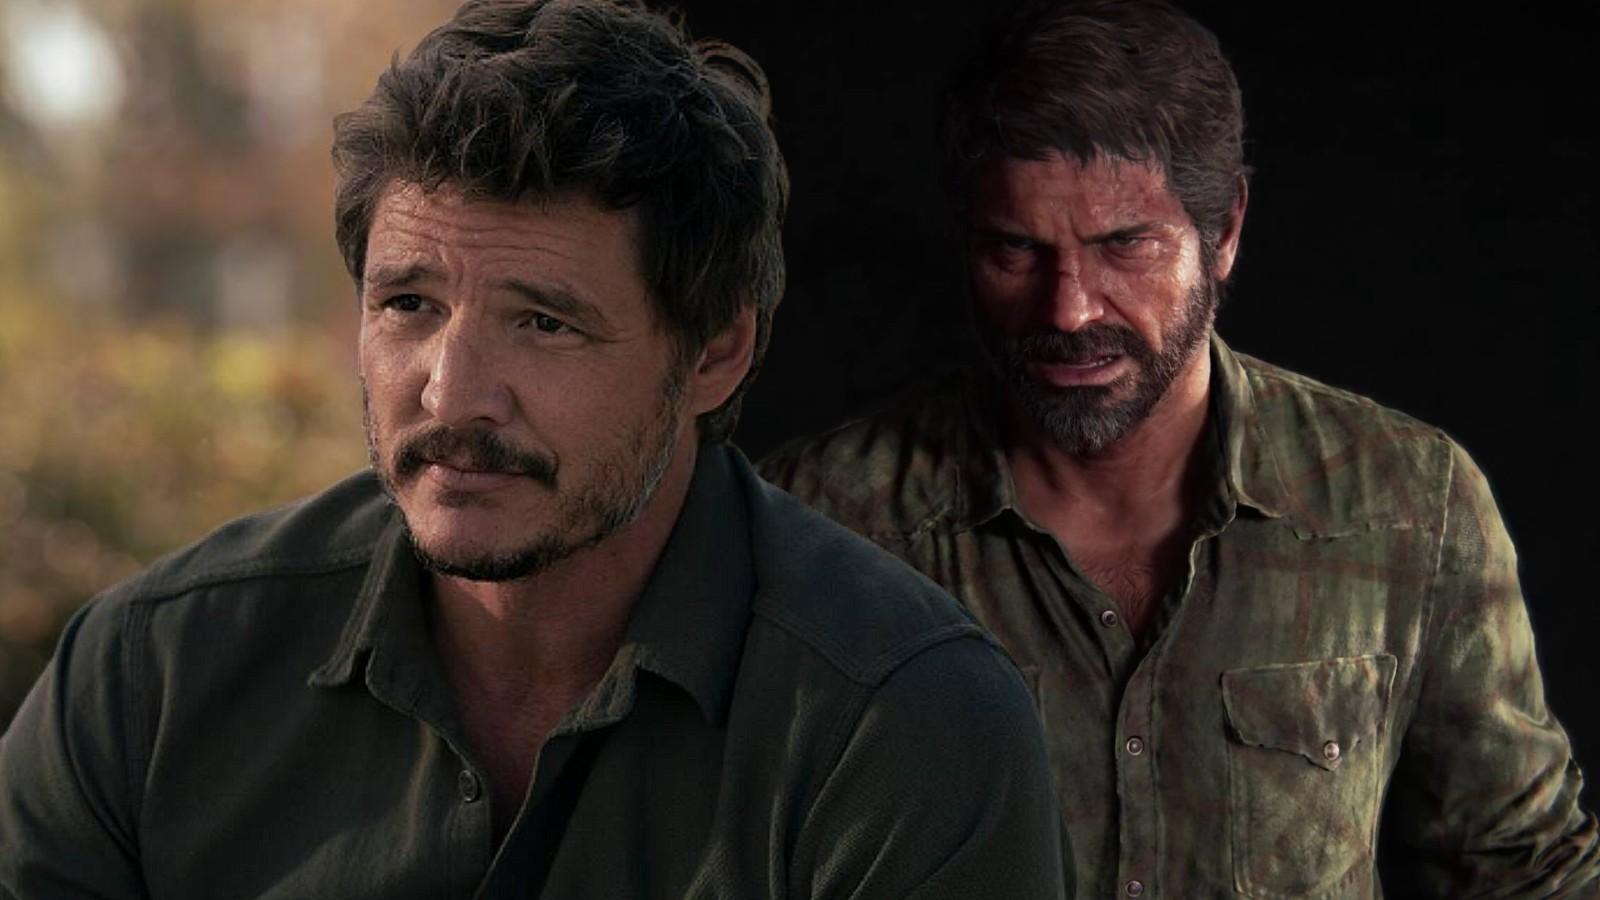 Pedro Pascal as Joel in The Last of Us and a still from the game